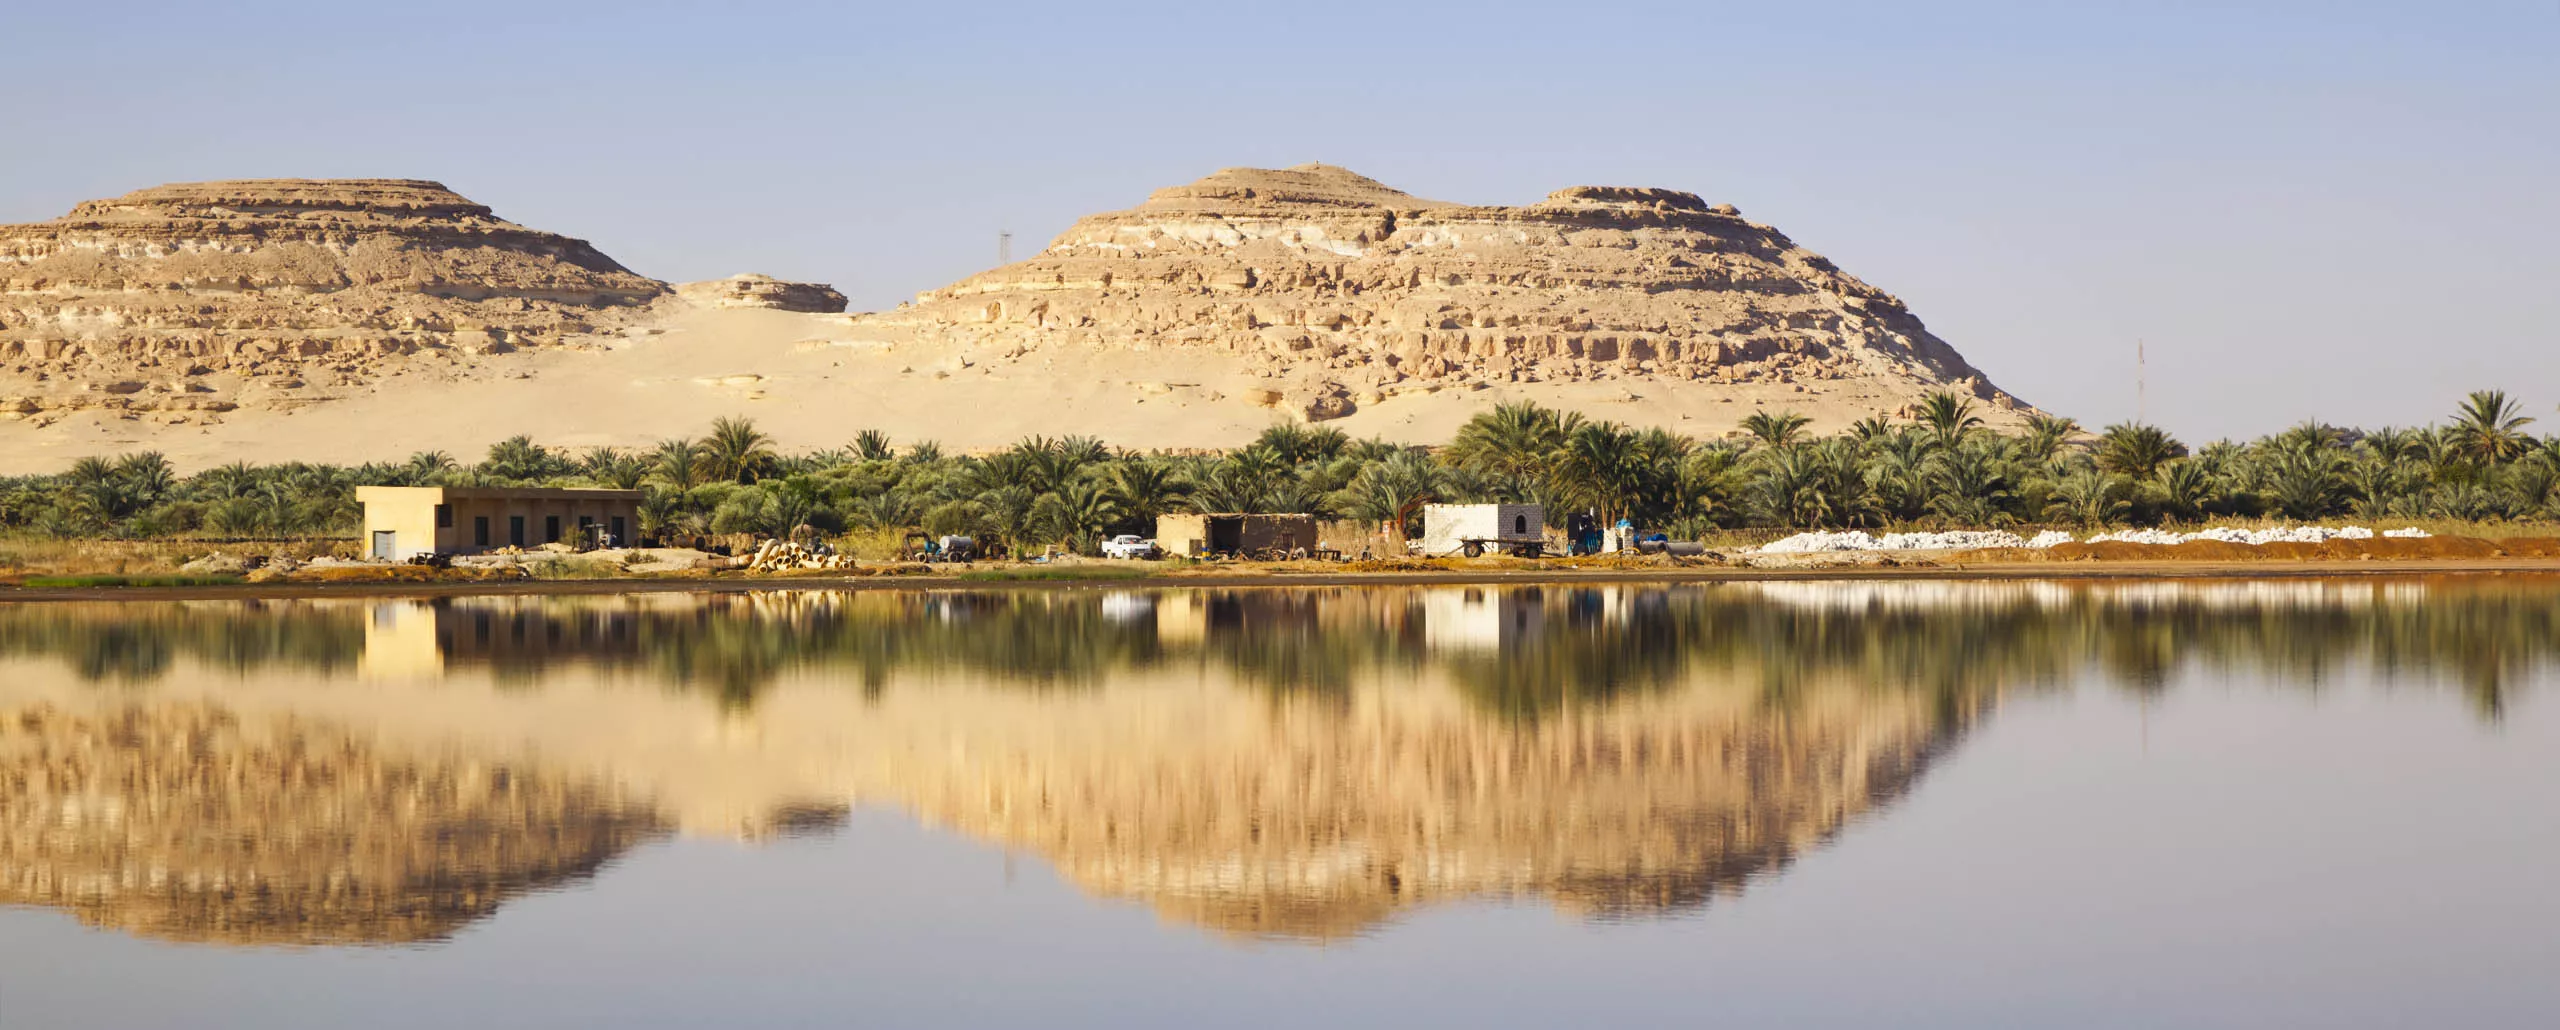 Siwa Oasis in Egypt, Africa | Oases - Rated 4